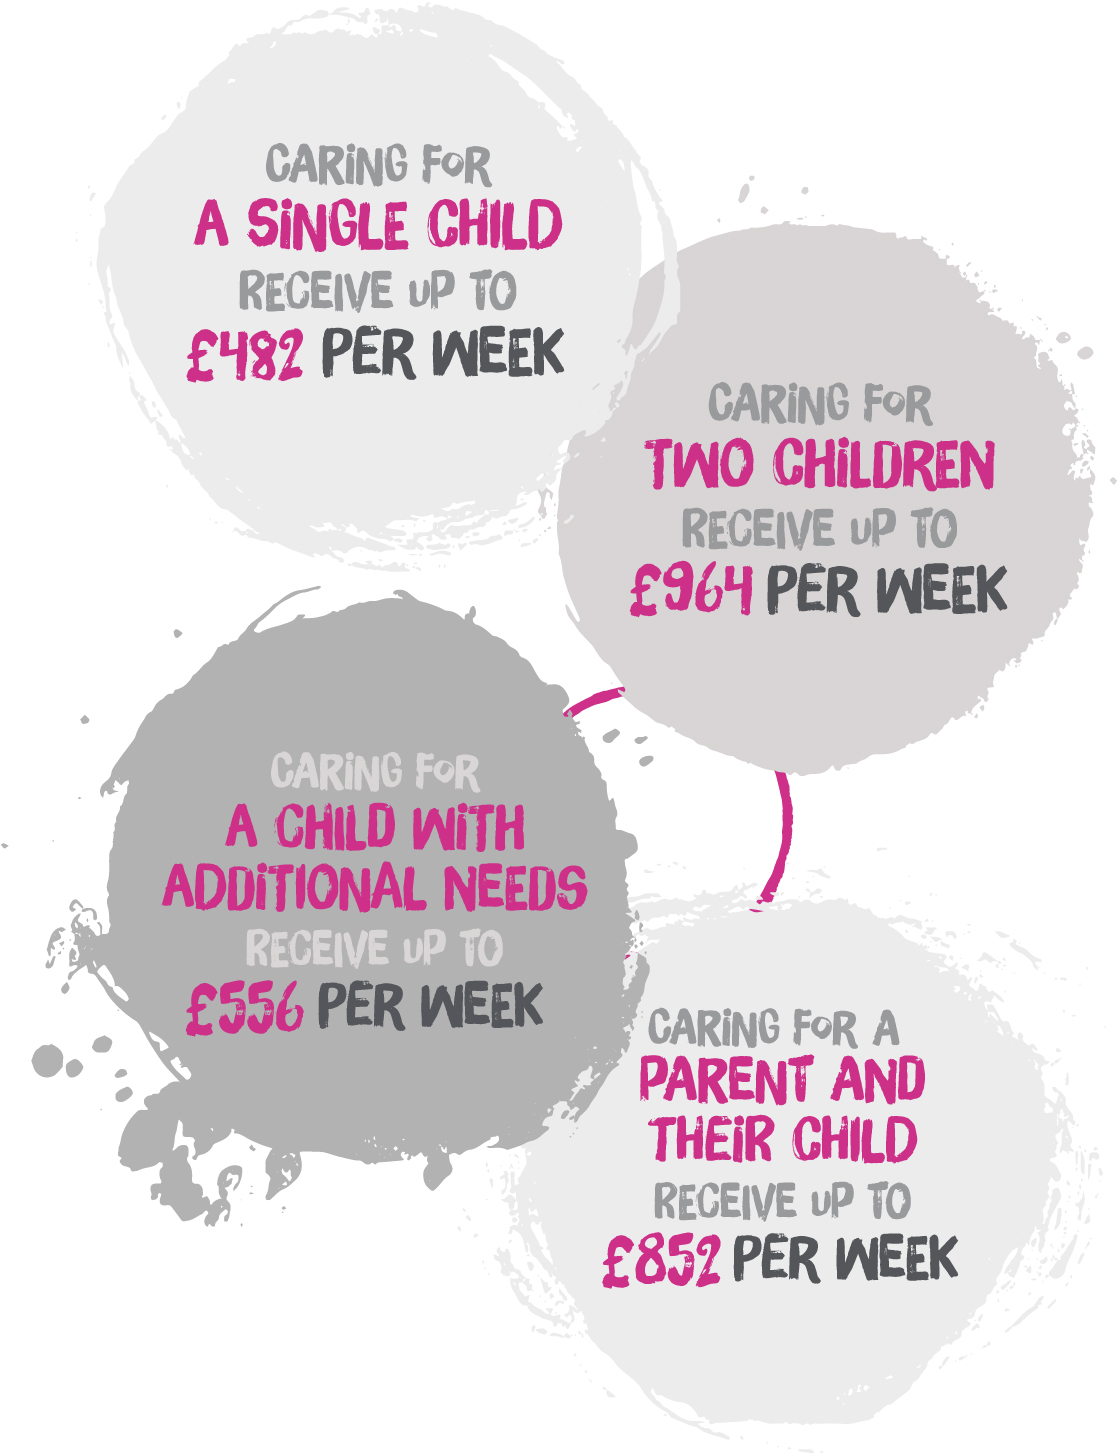 These are our fees if you're thinking of fostering in Northamptonshire